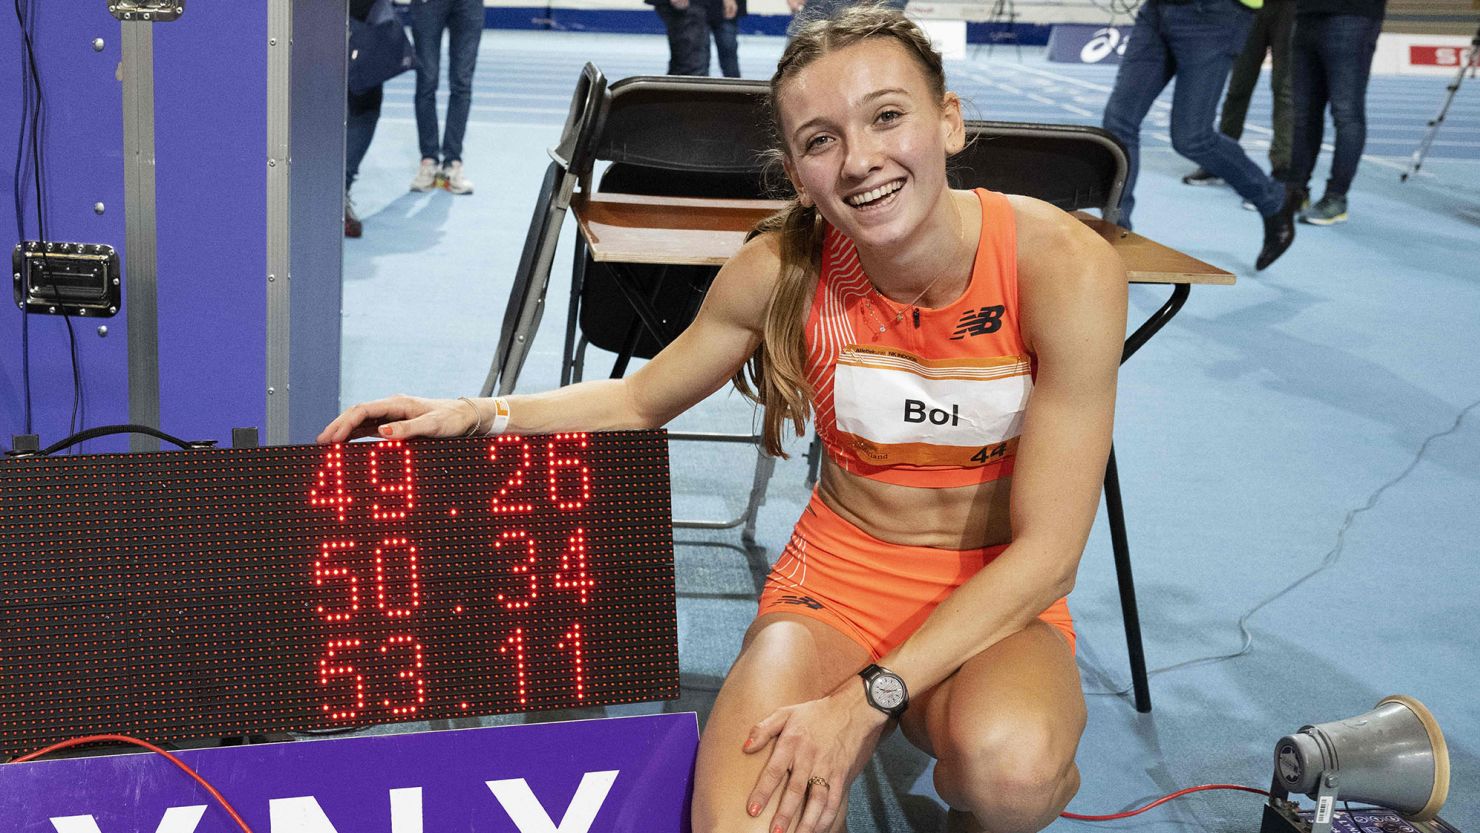 Femke Bol celebrates after winning the women's 400 meters race and beating a 41-year-old world record.